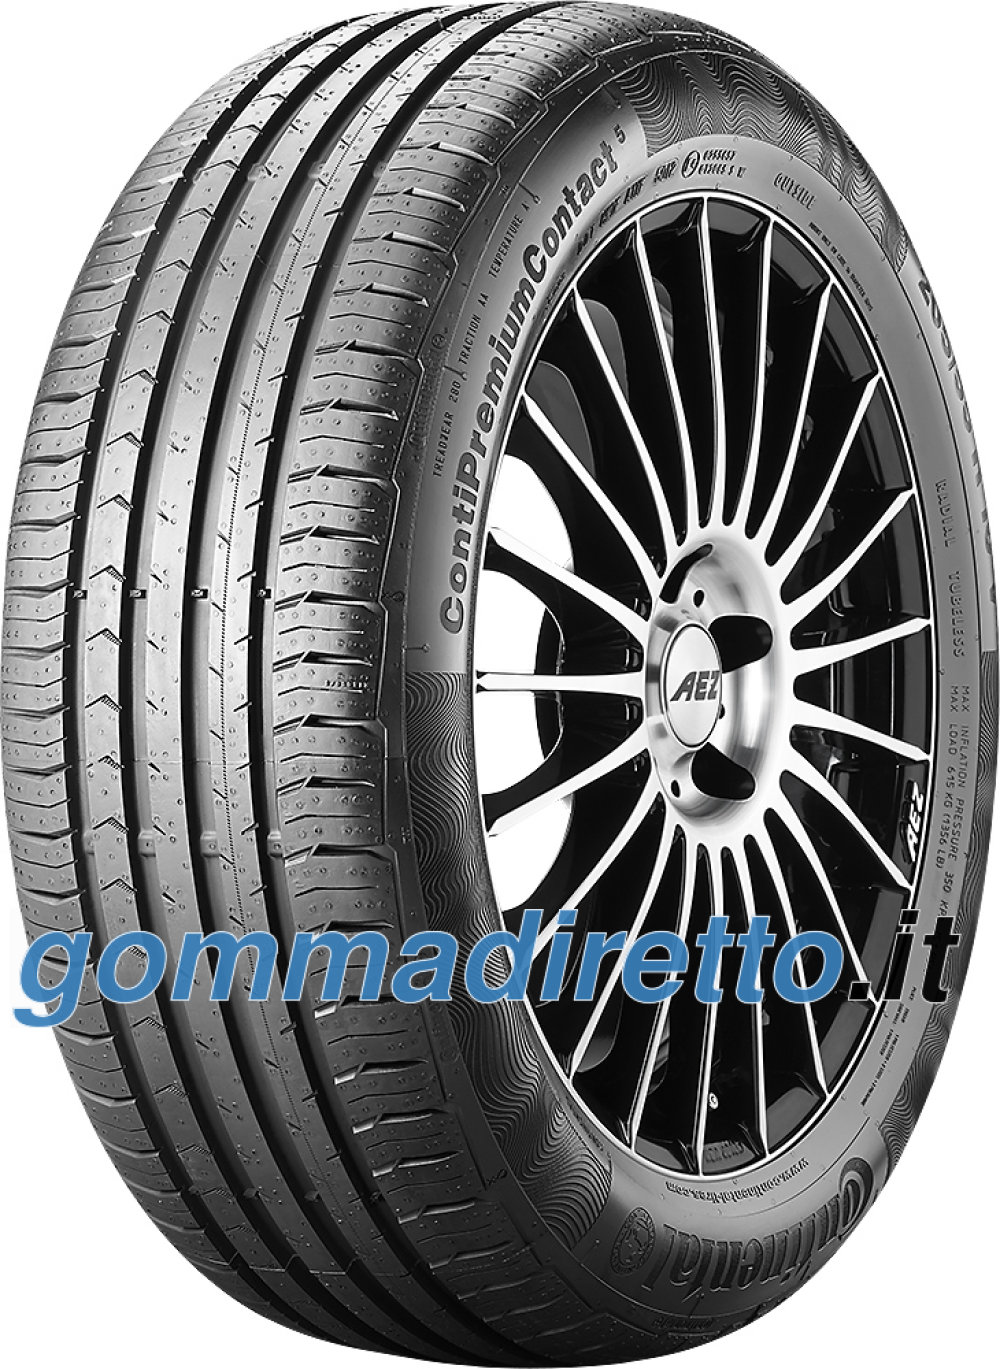 Image of Continental ContiPremiumContact 5 ( 185/55 R15 82V )